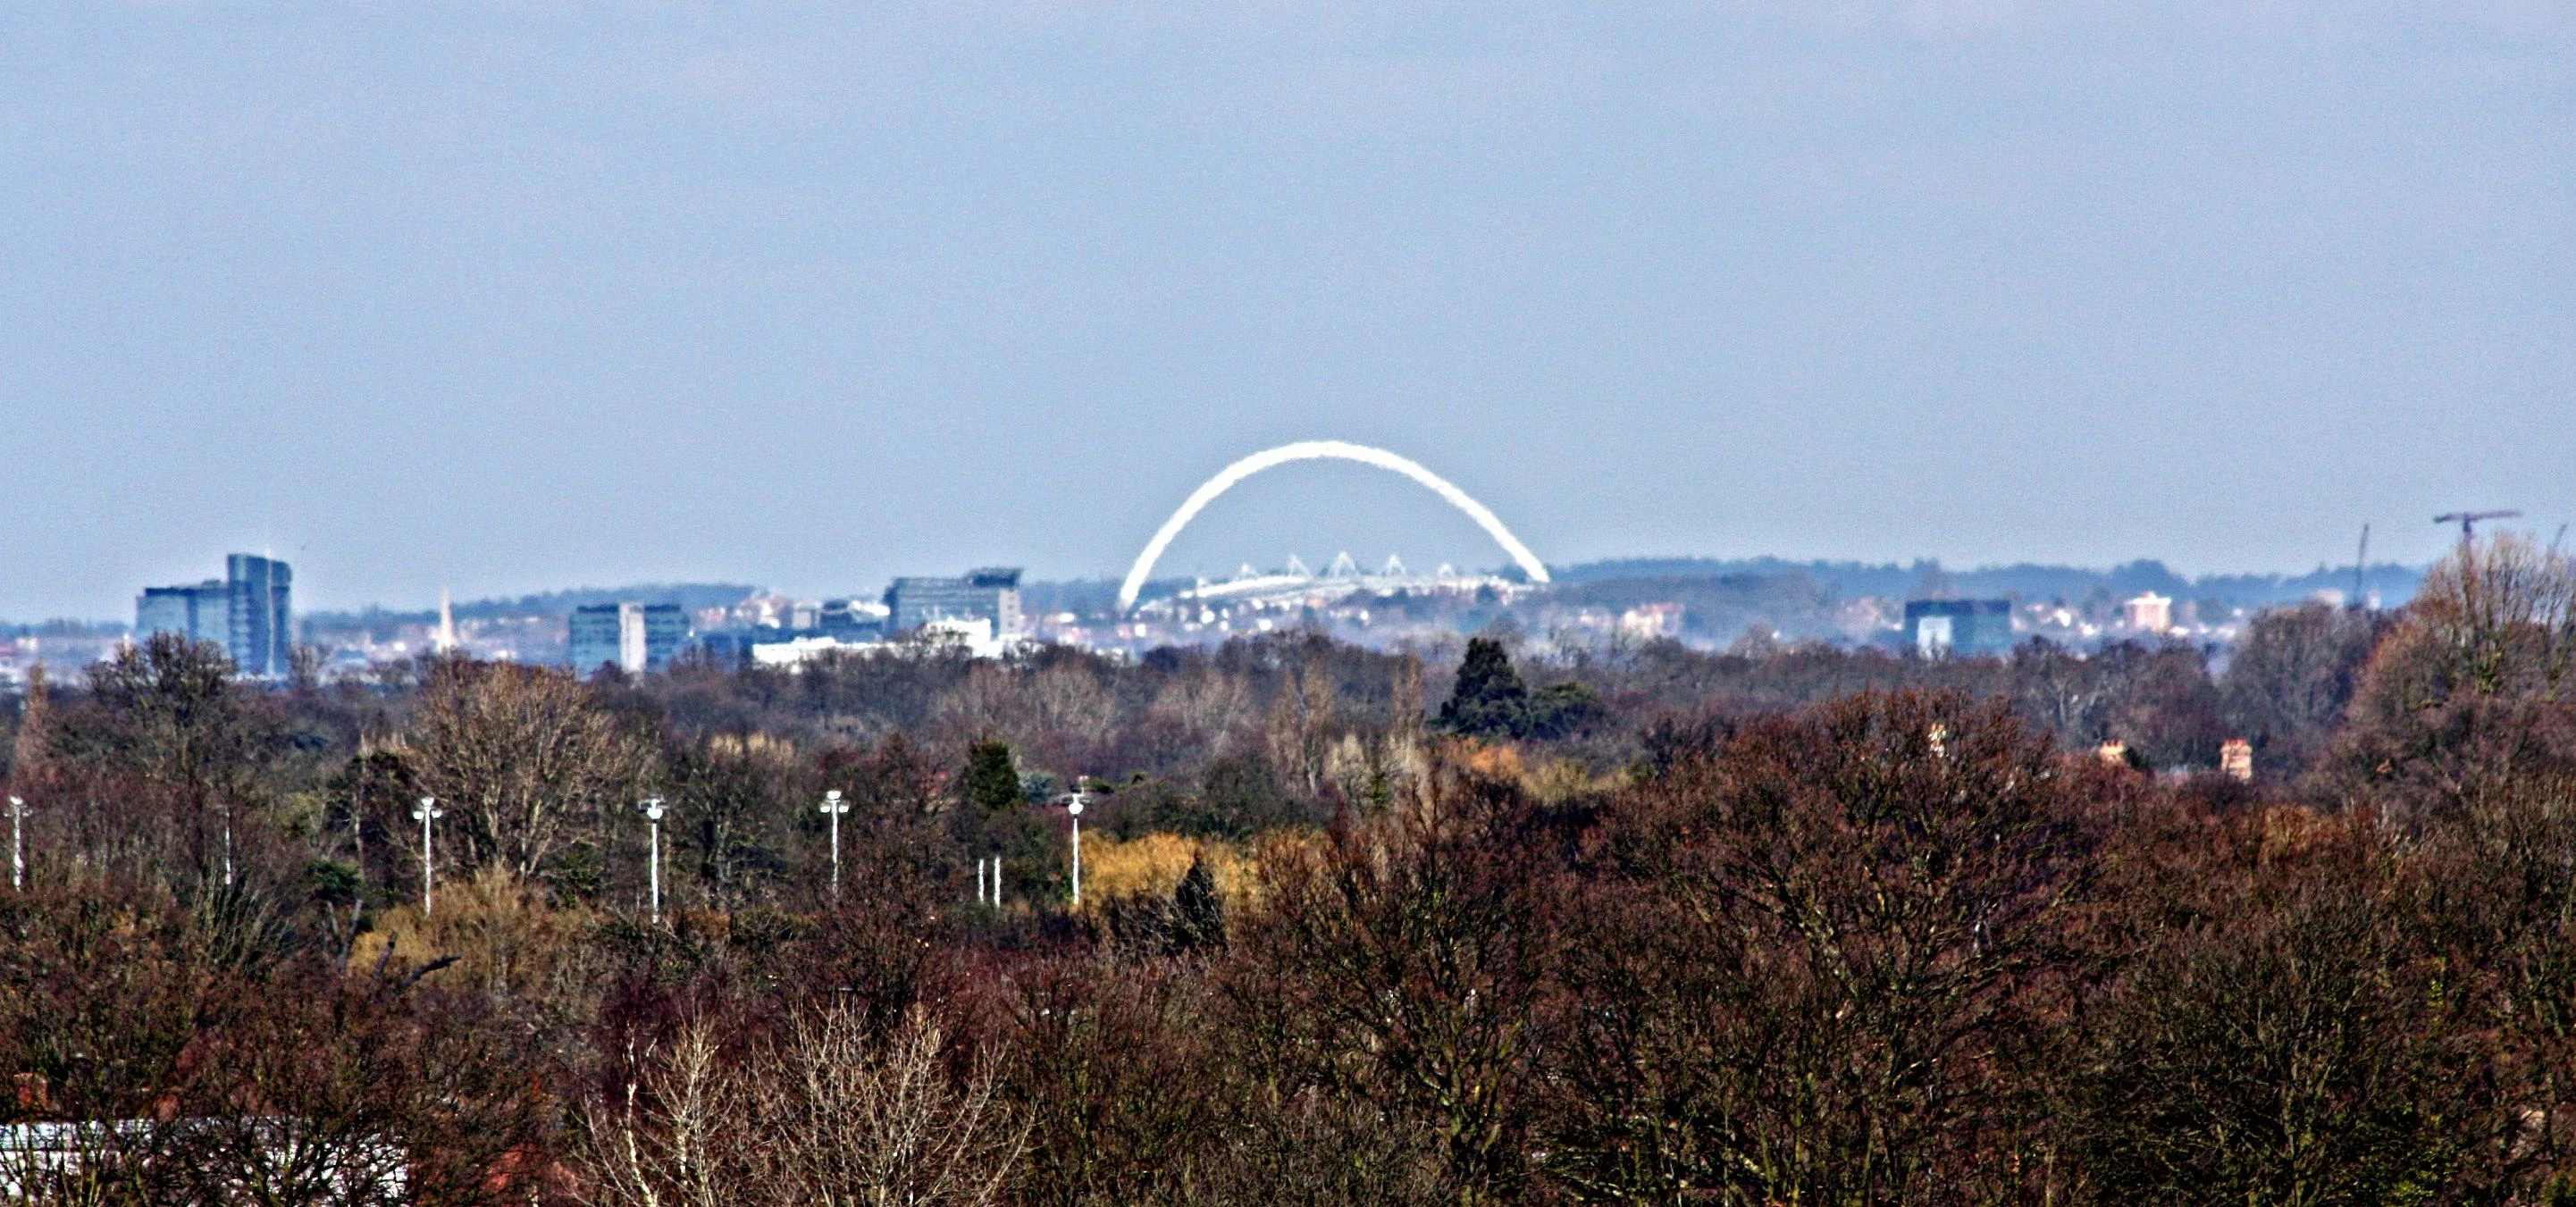 Over the Rainbow - Wembley's New Arch from Sandown Park - March 2010